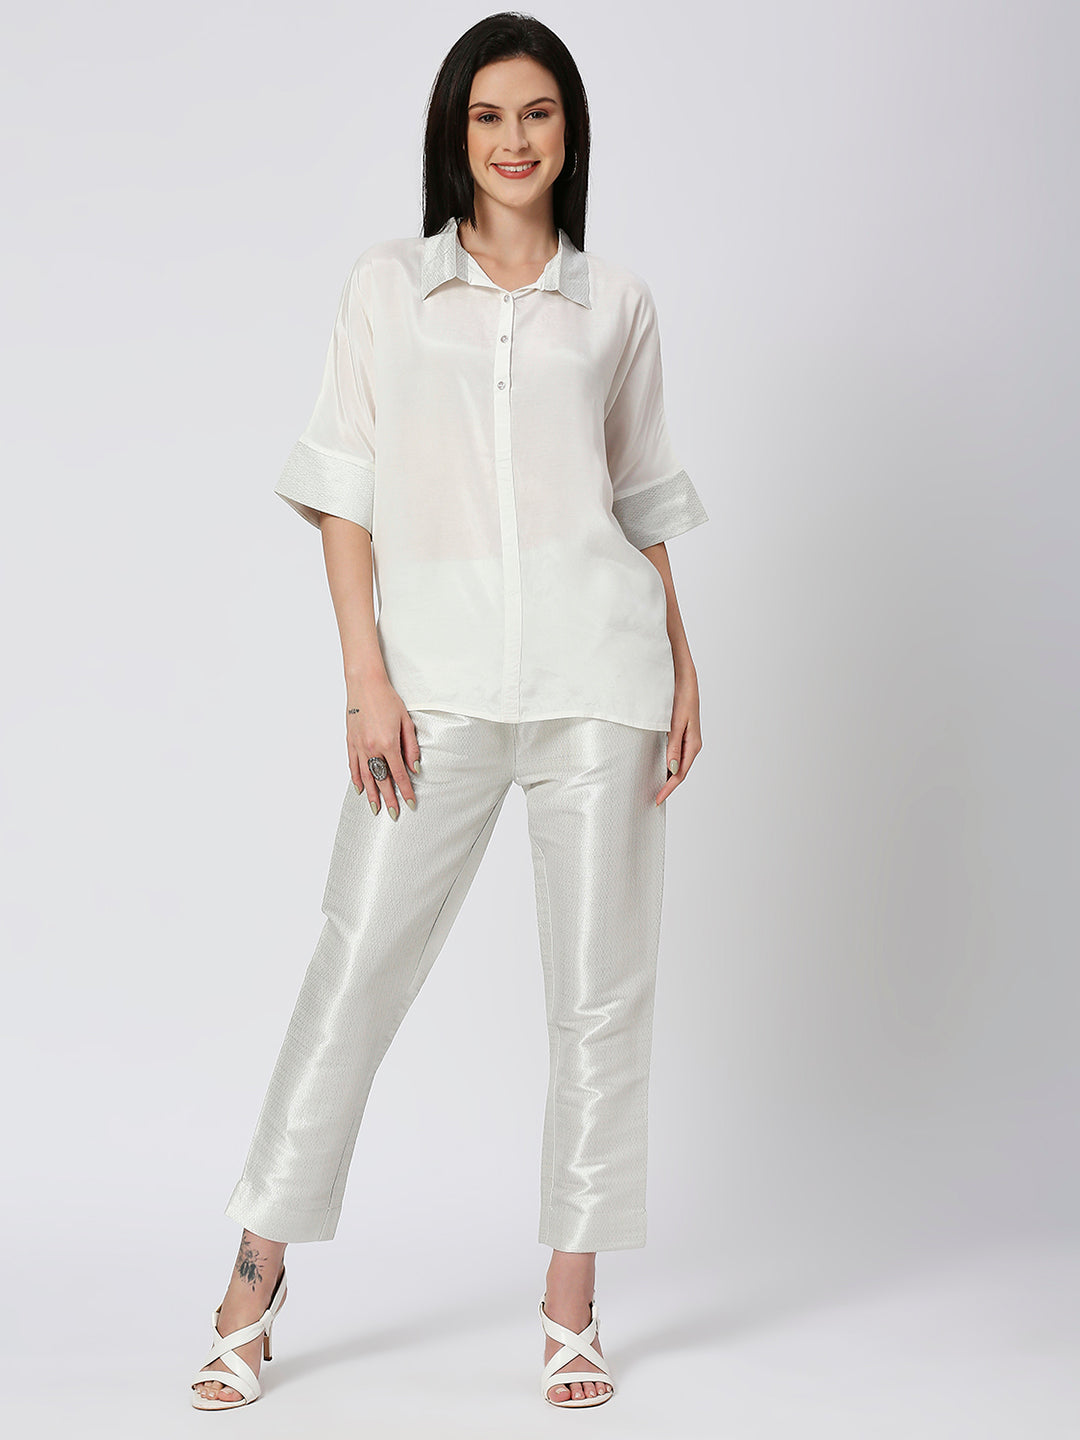 White Solid Viscose Top with Brocade Trims & Pant